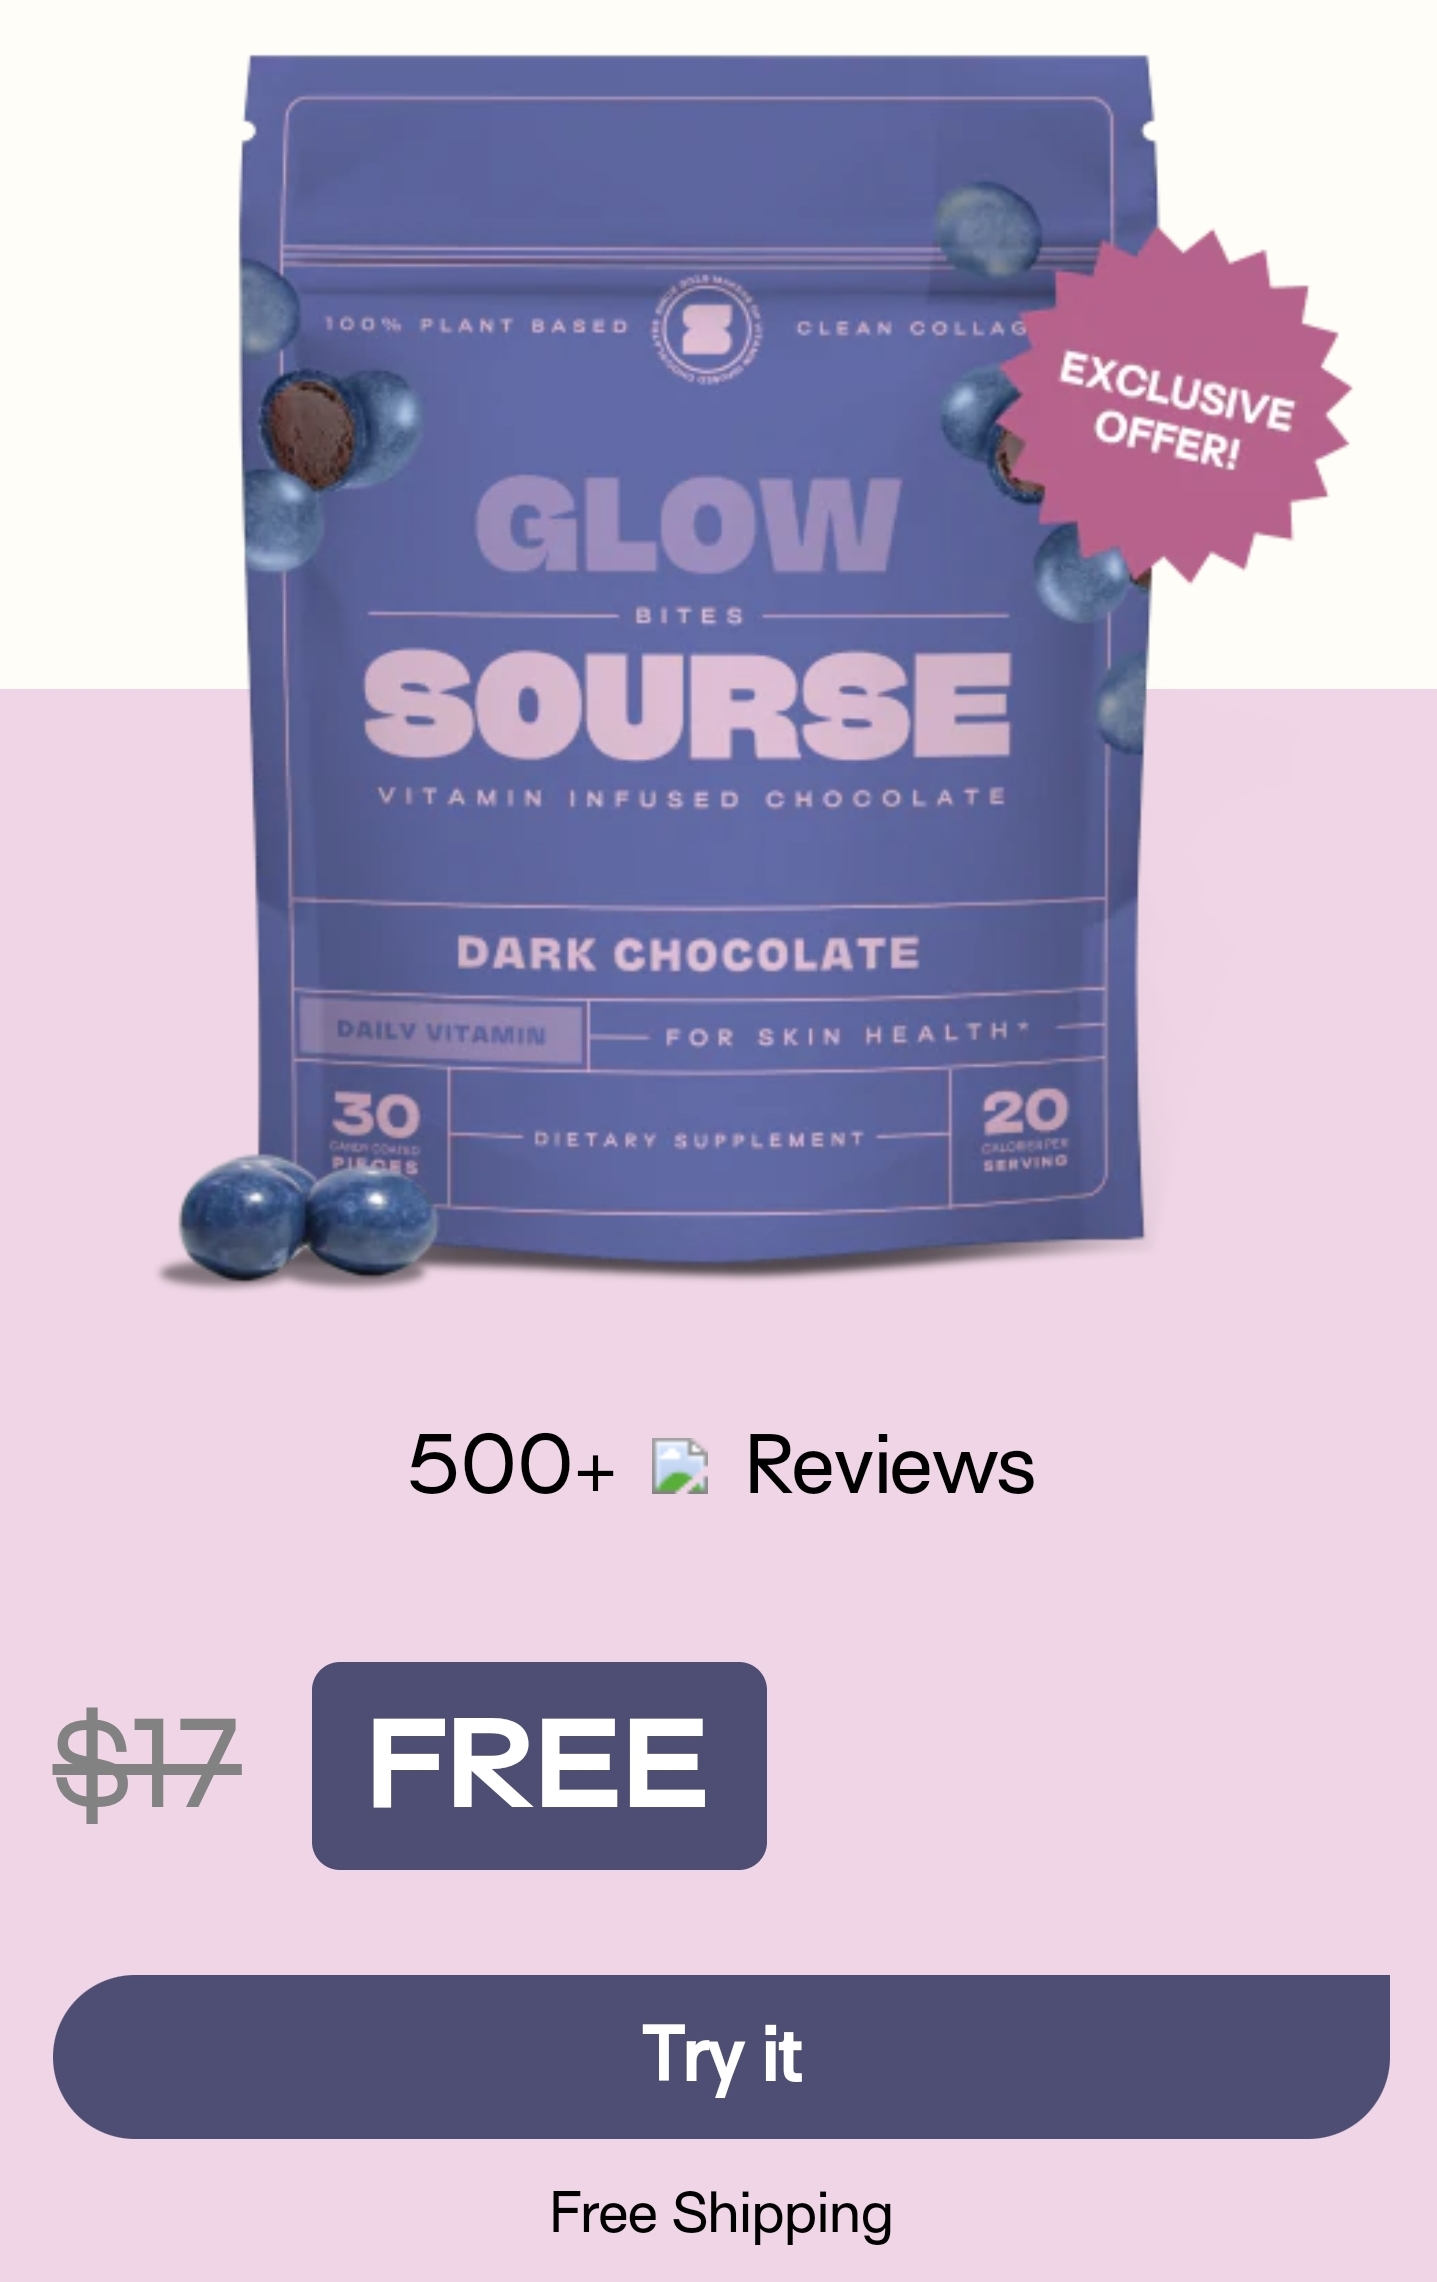 Free 15-Day Supply of Sourse Glow Bites ($17 Value)